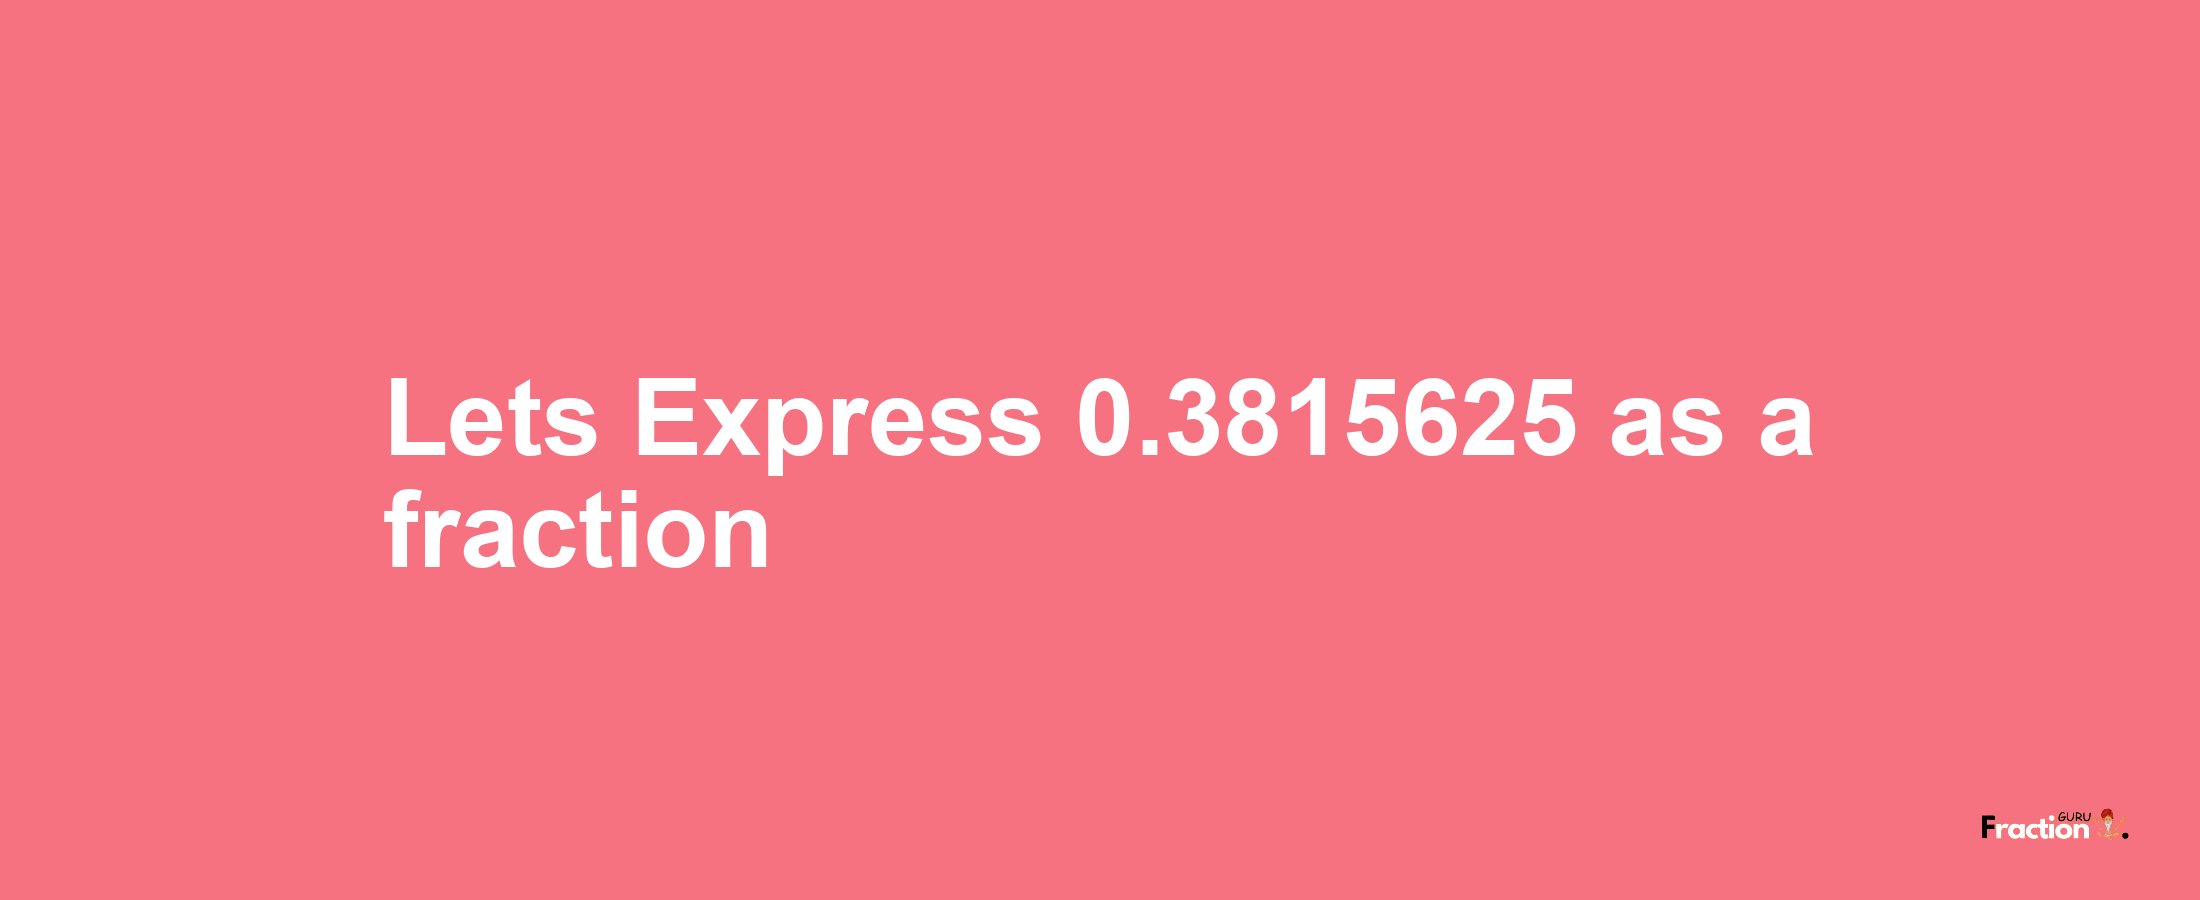 Lets Express 0.3815625 as afraction